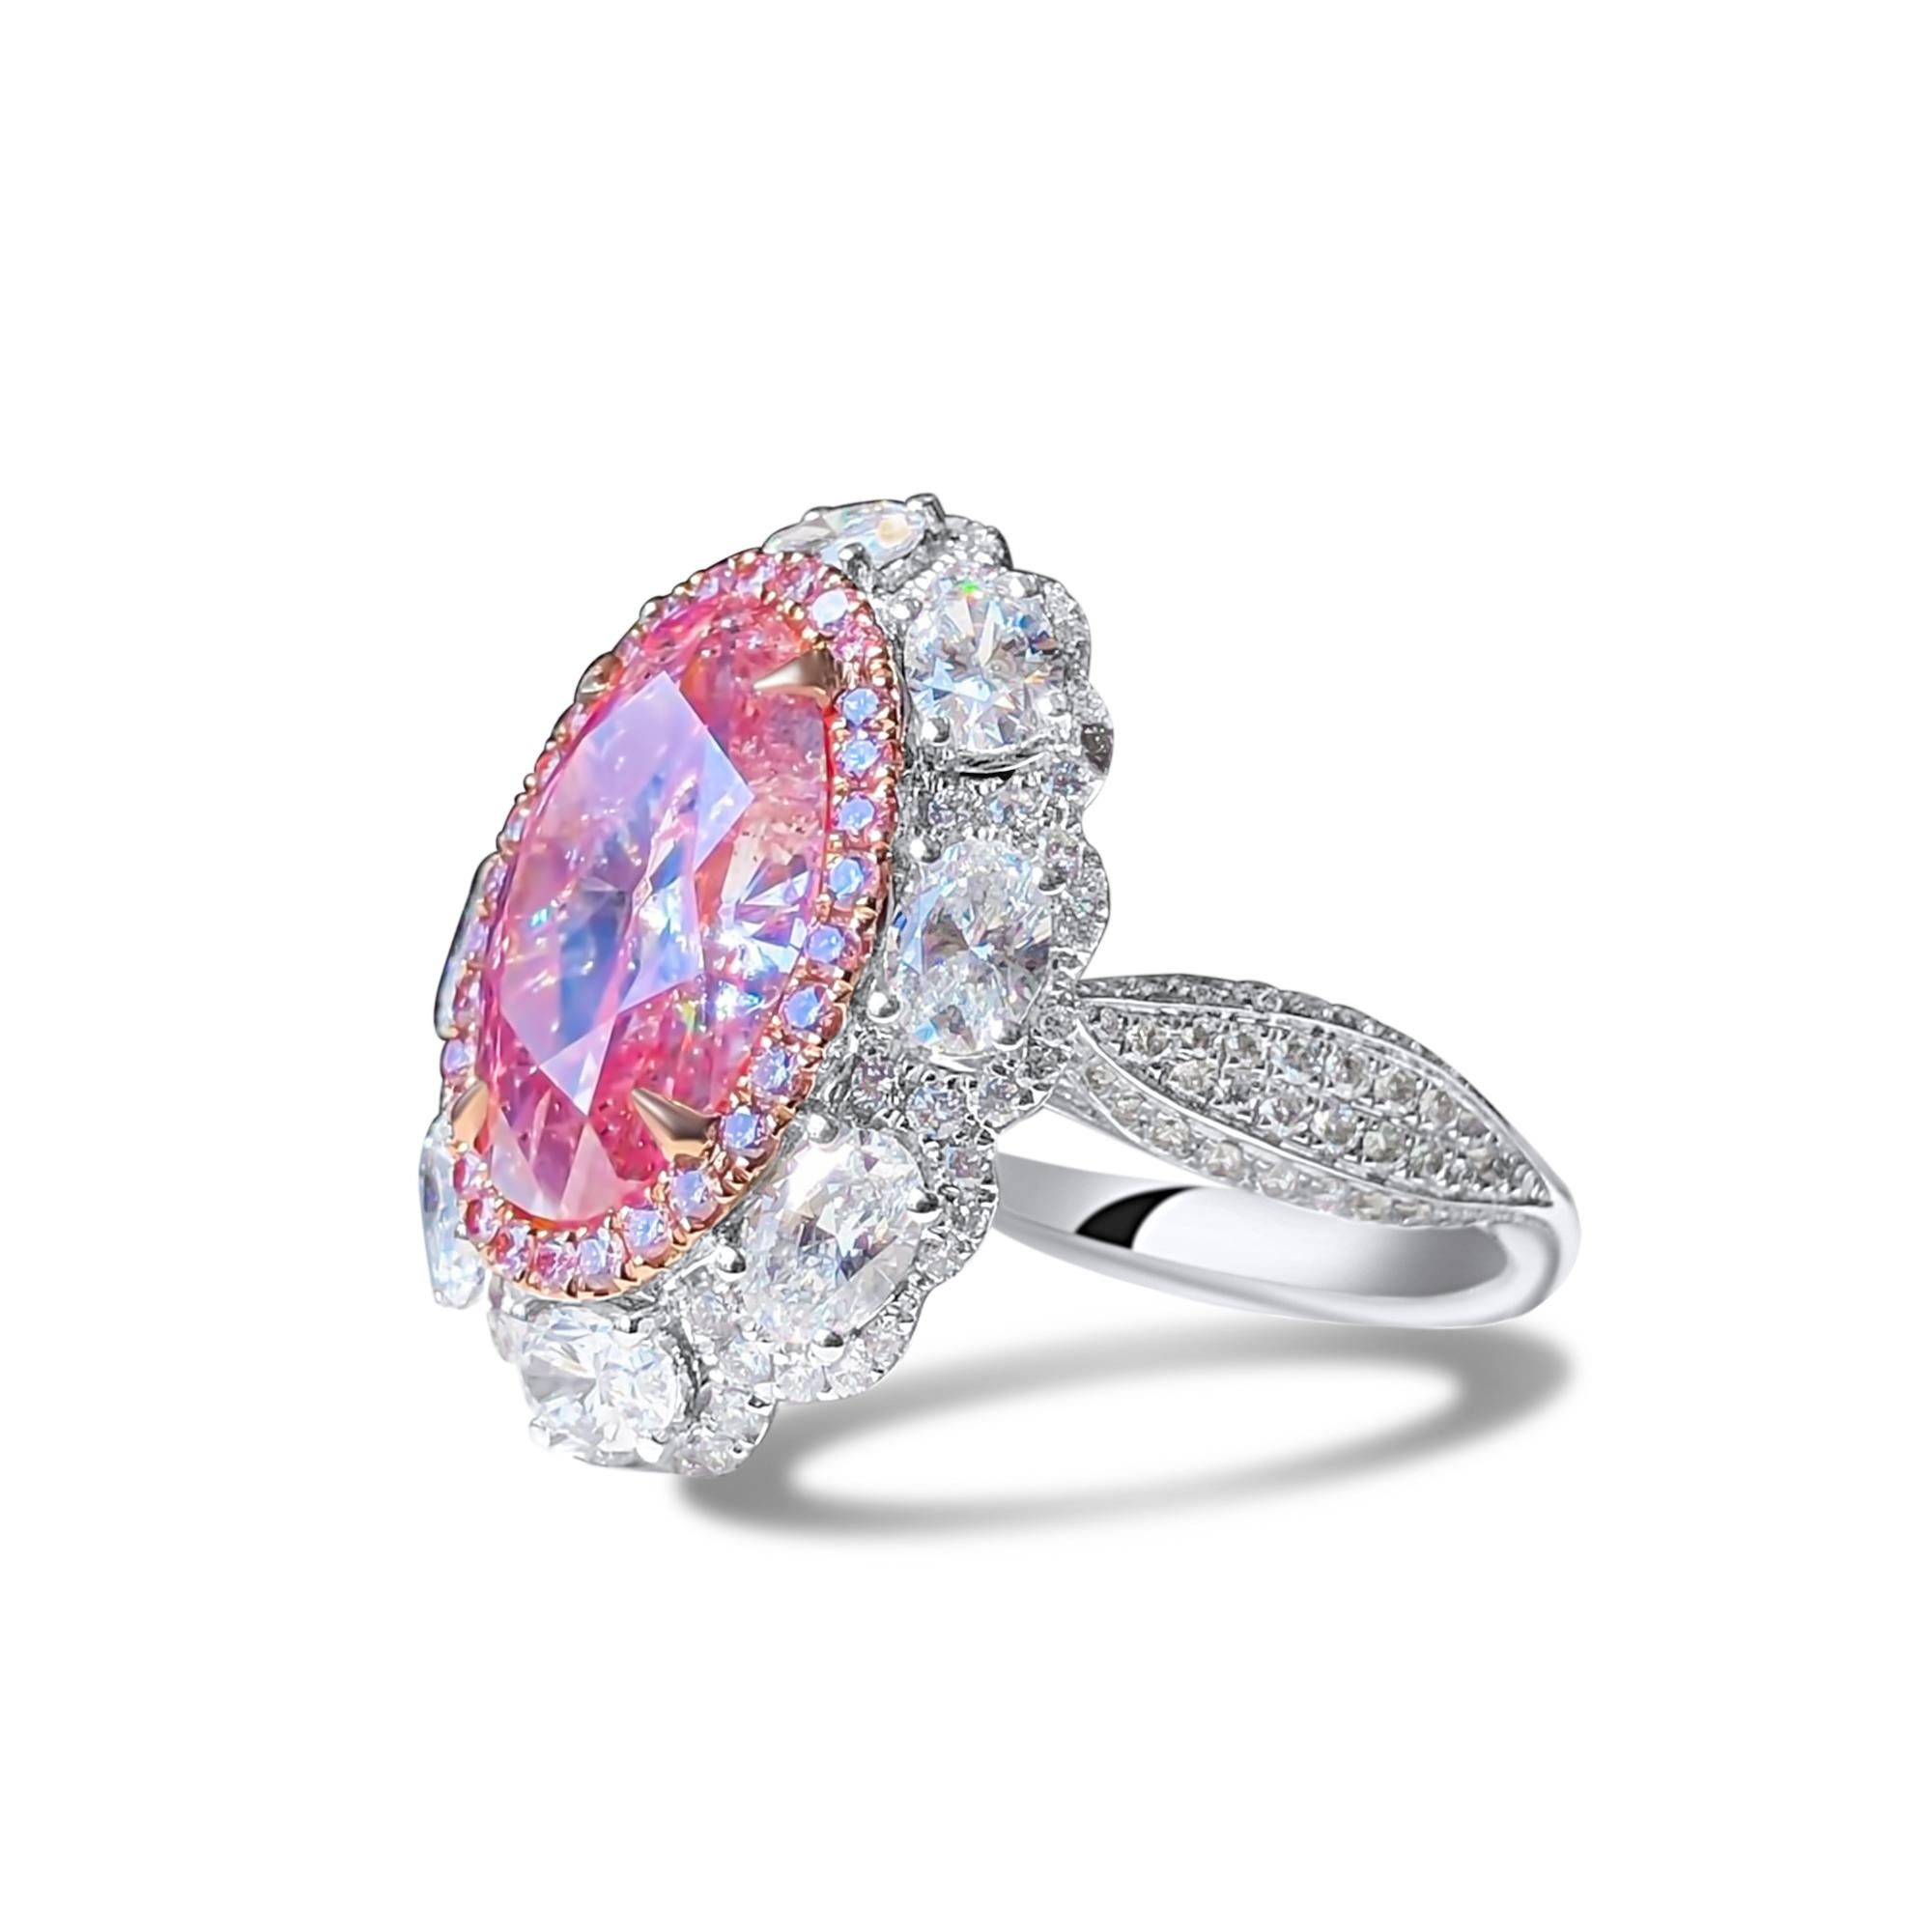 Early Victorian Antique 5.04 Carat GIA Fancy Pink Oval Diamond Cocktail Ring For Sale